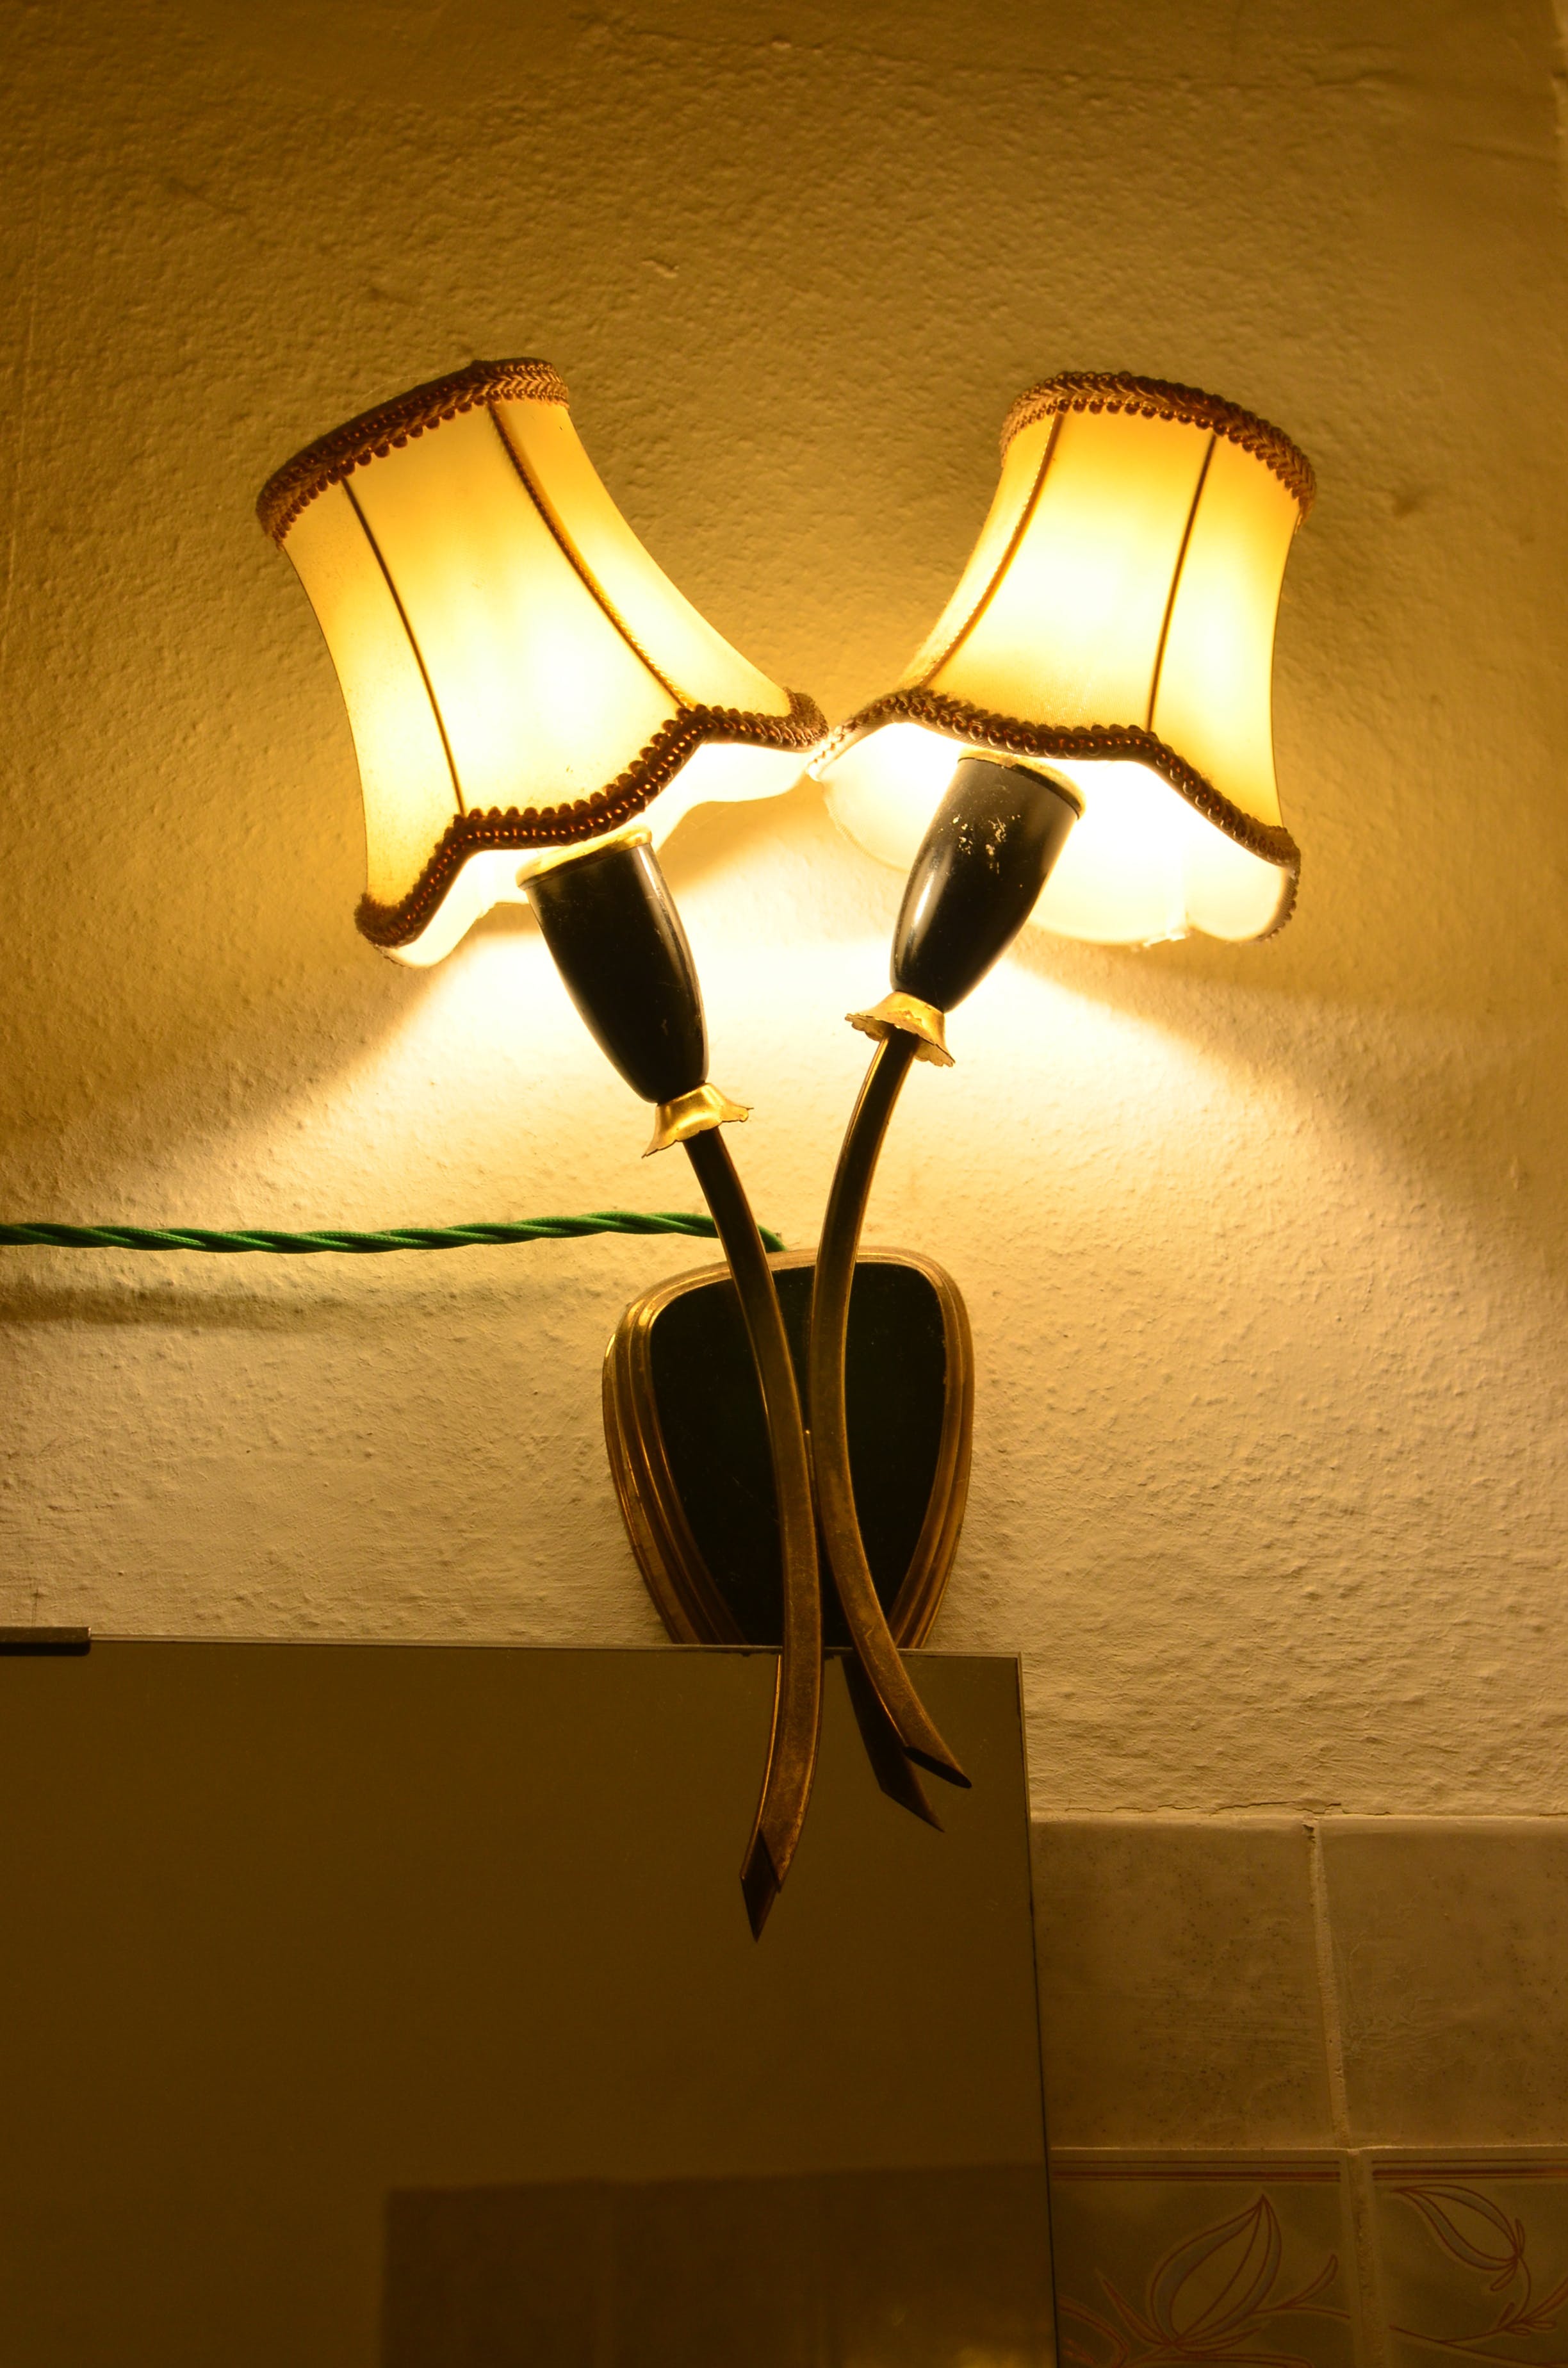 Switched on lamp near the wall